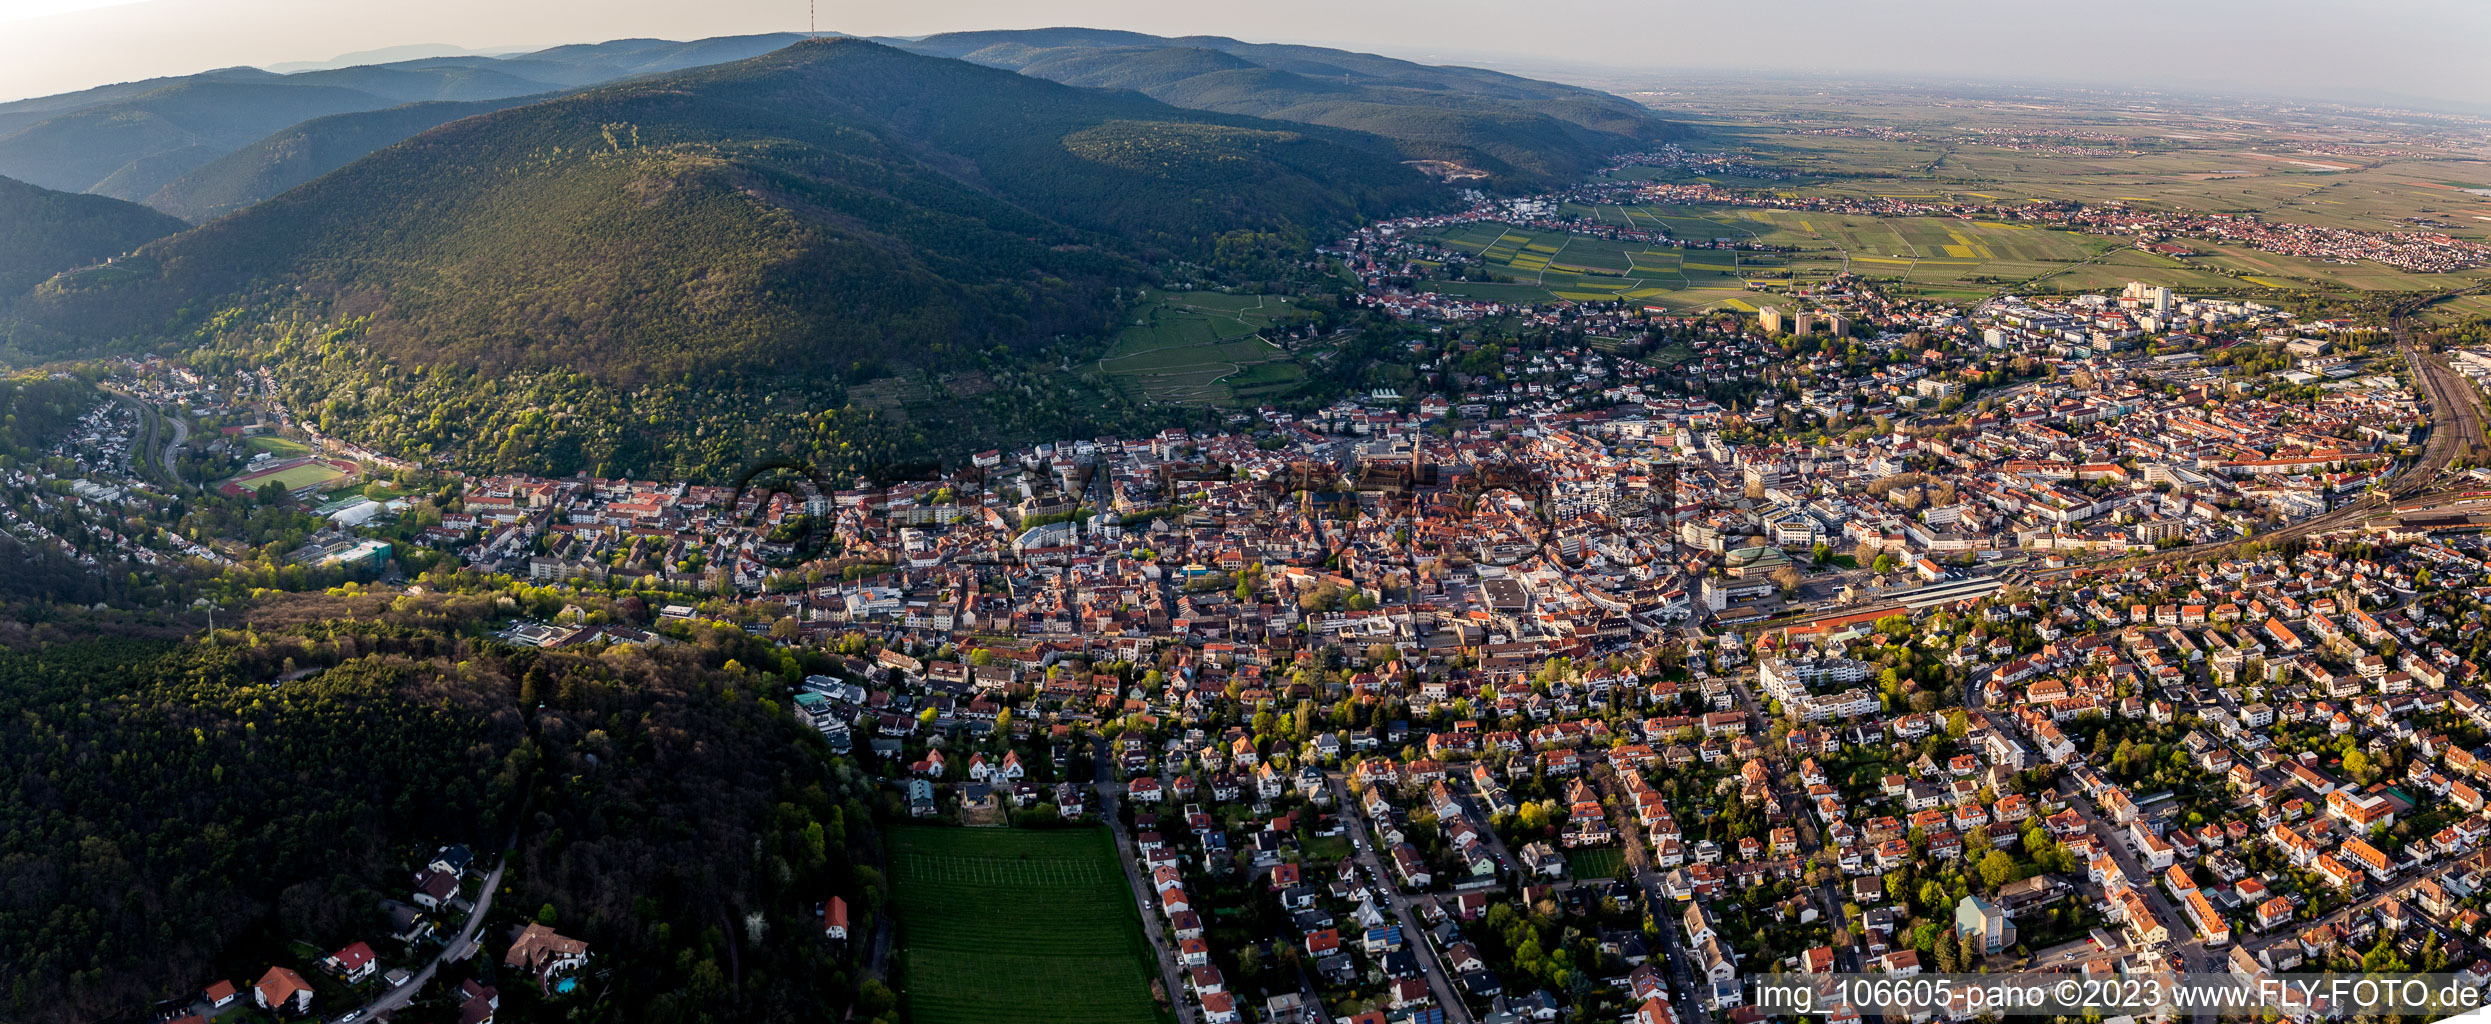 Neustadt an der Weinstraße in the state Rhineland-Palatinate, Germany from the drone perspective